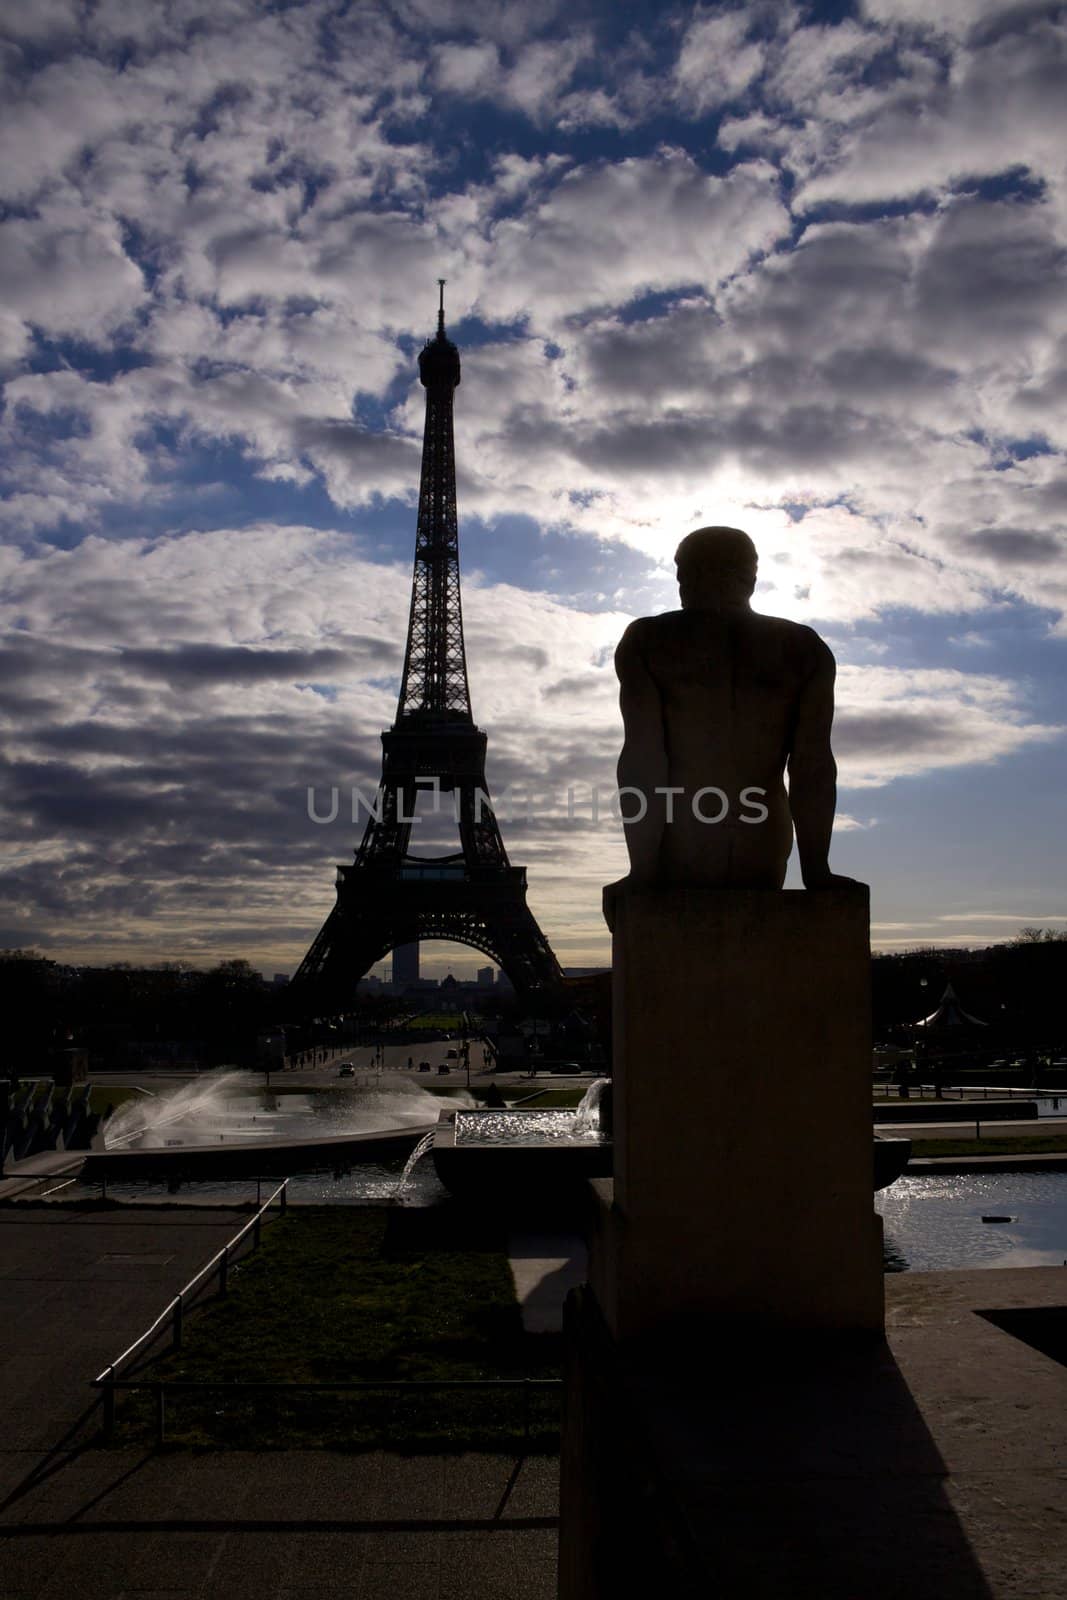 Backlit silhouette of Eiffel Tower and statue on Trocadero in Paris